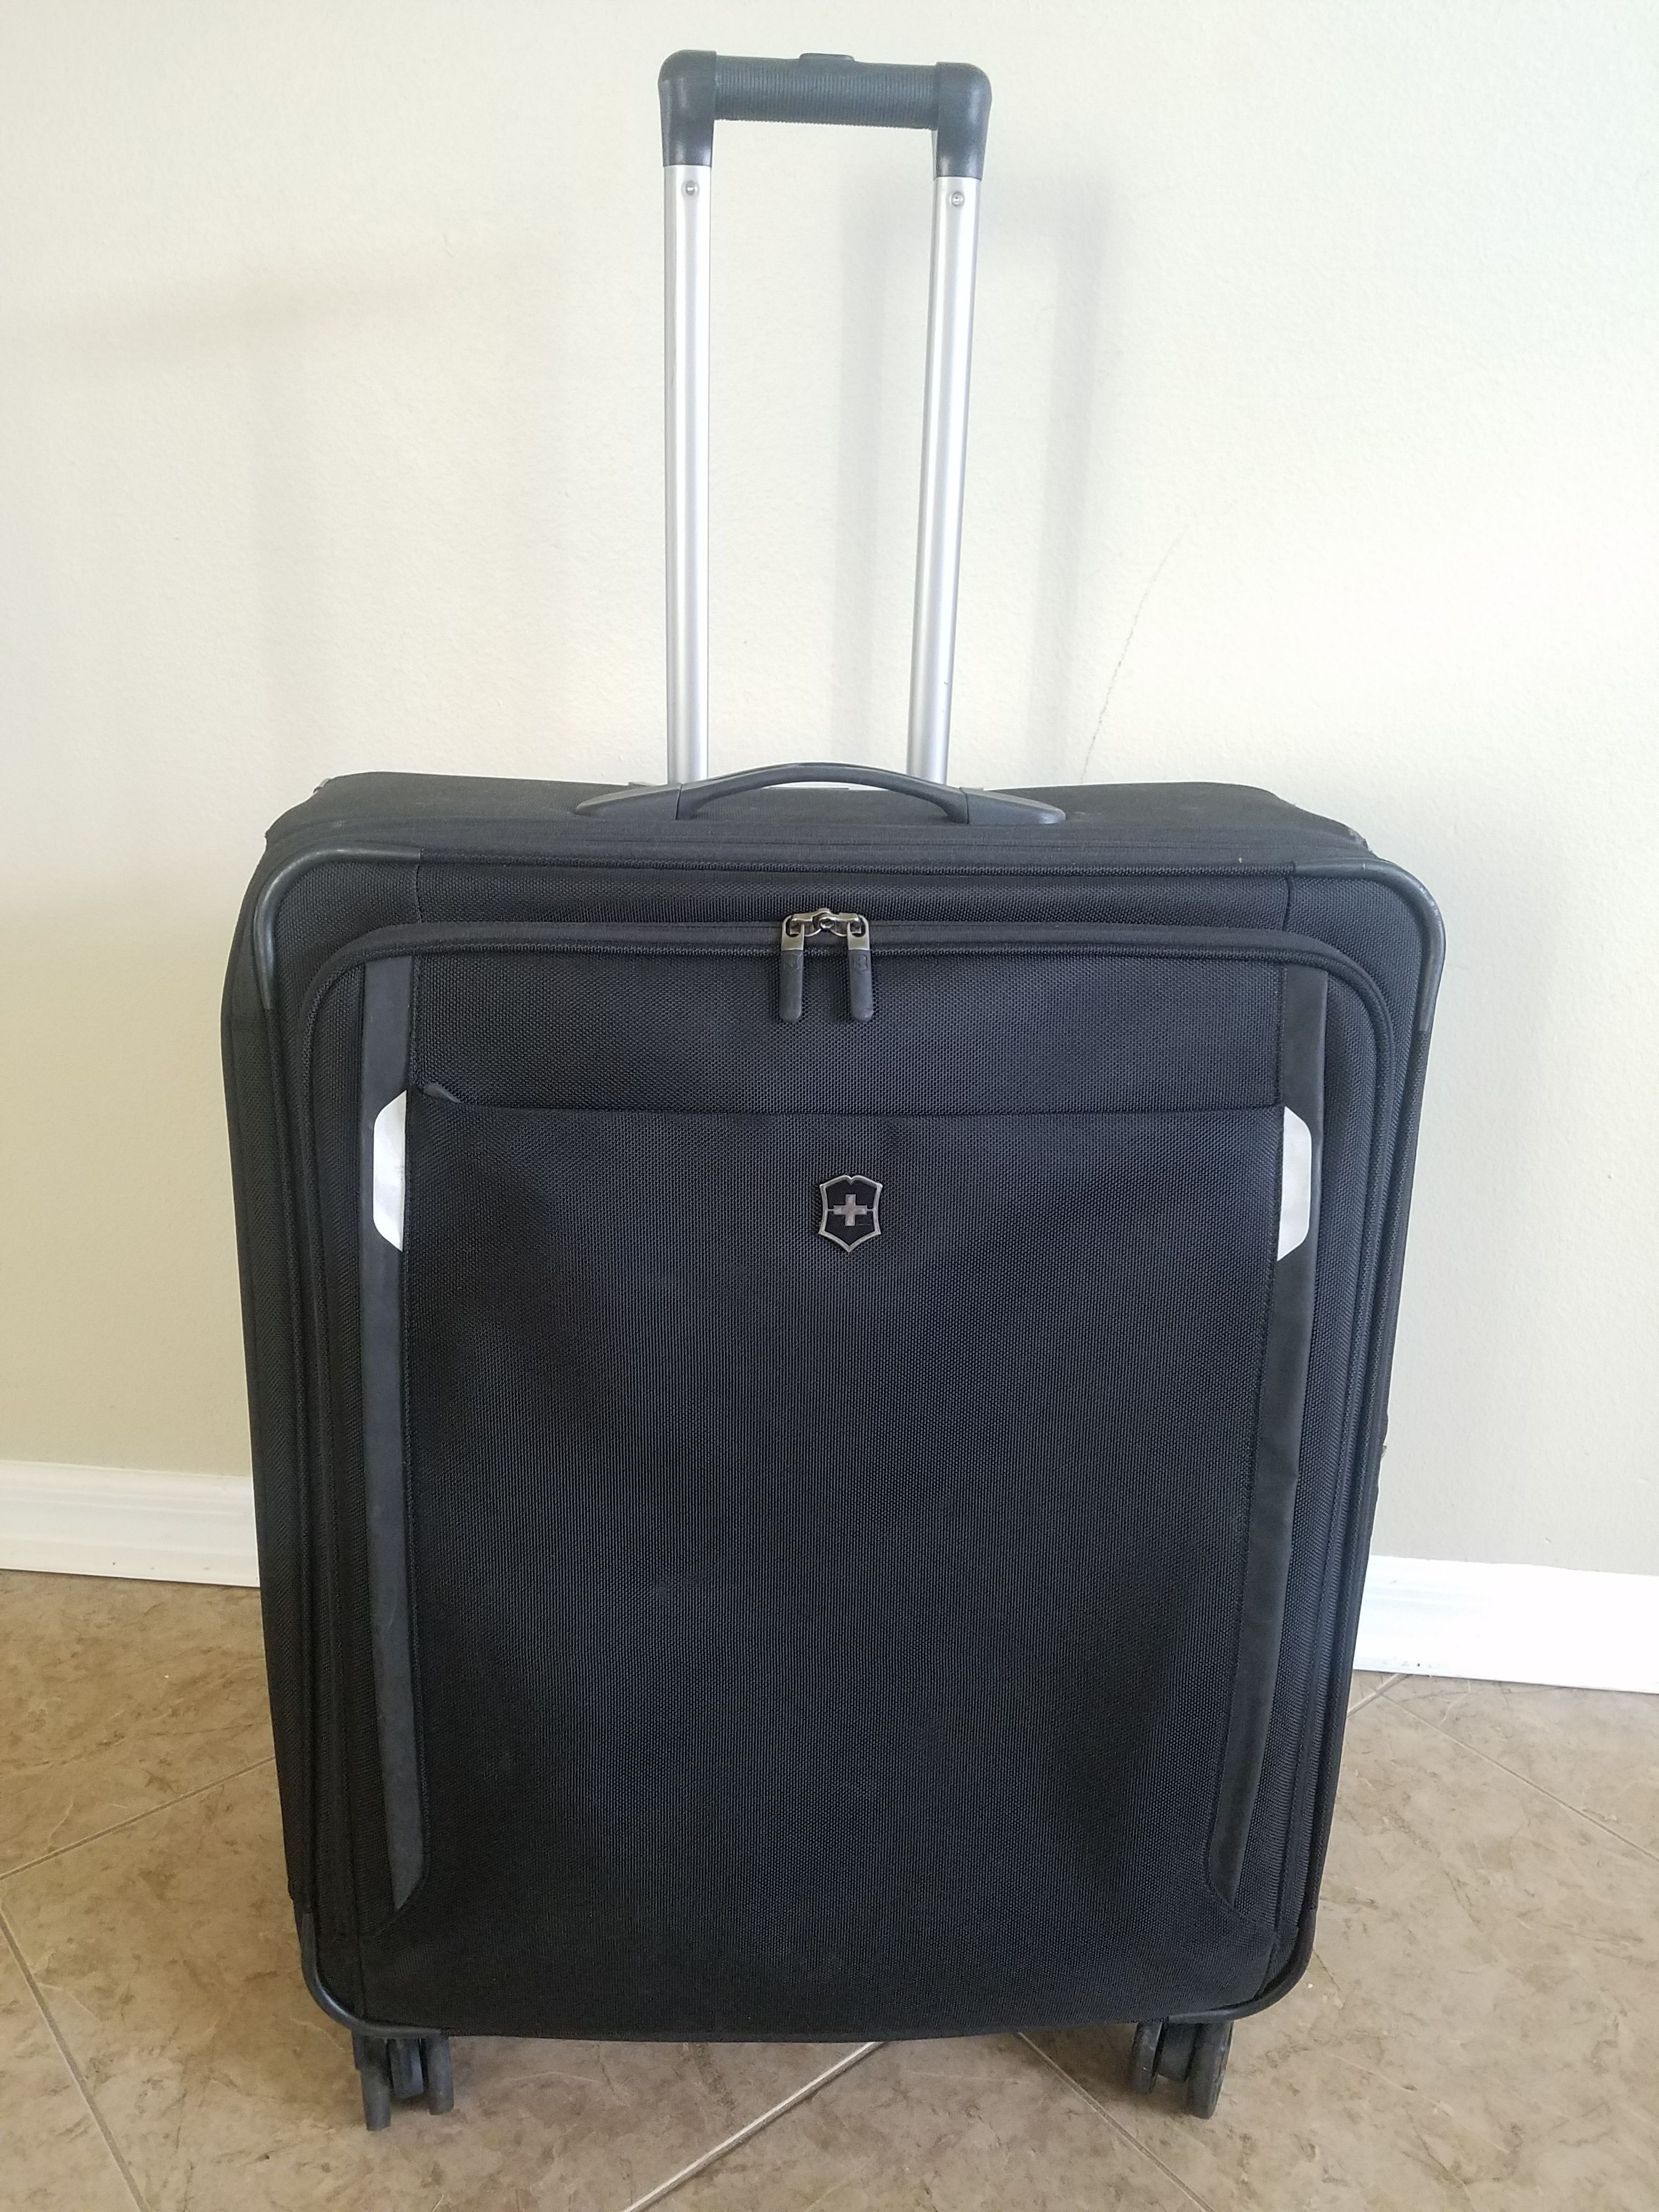 Free delivery Today Victorinox swiss army werks 27" luggage spinner travel bag black $600